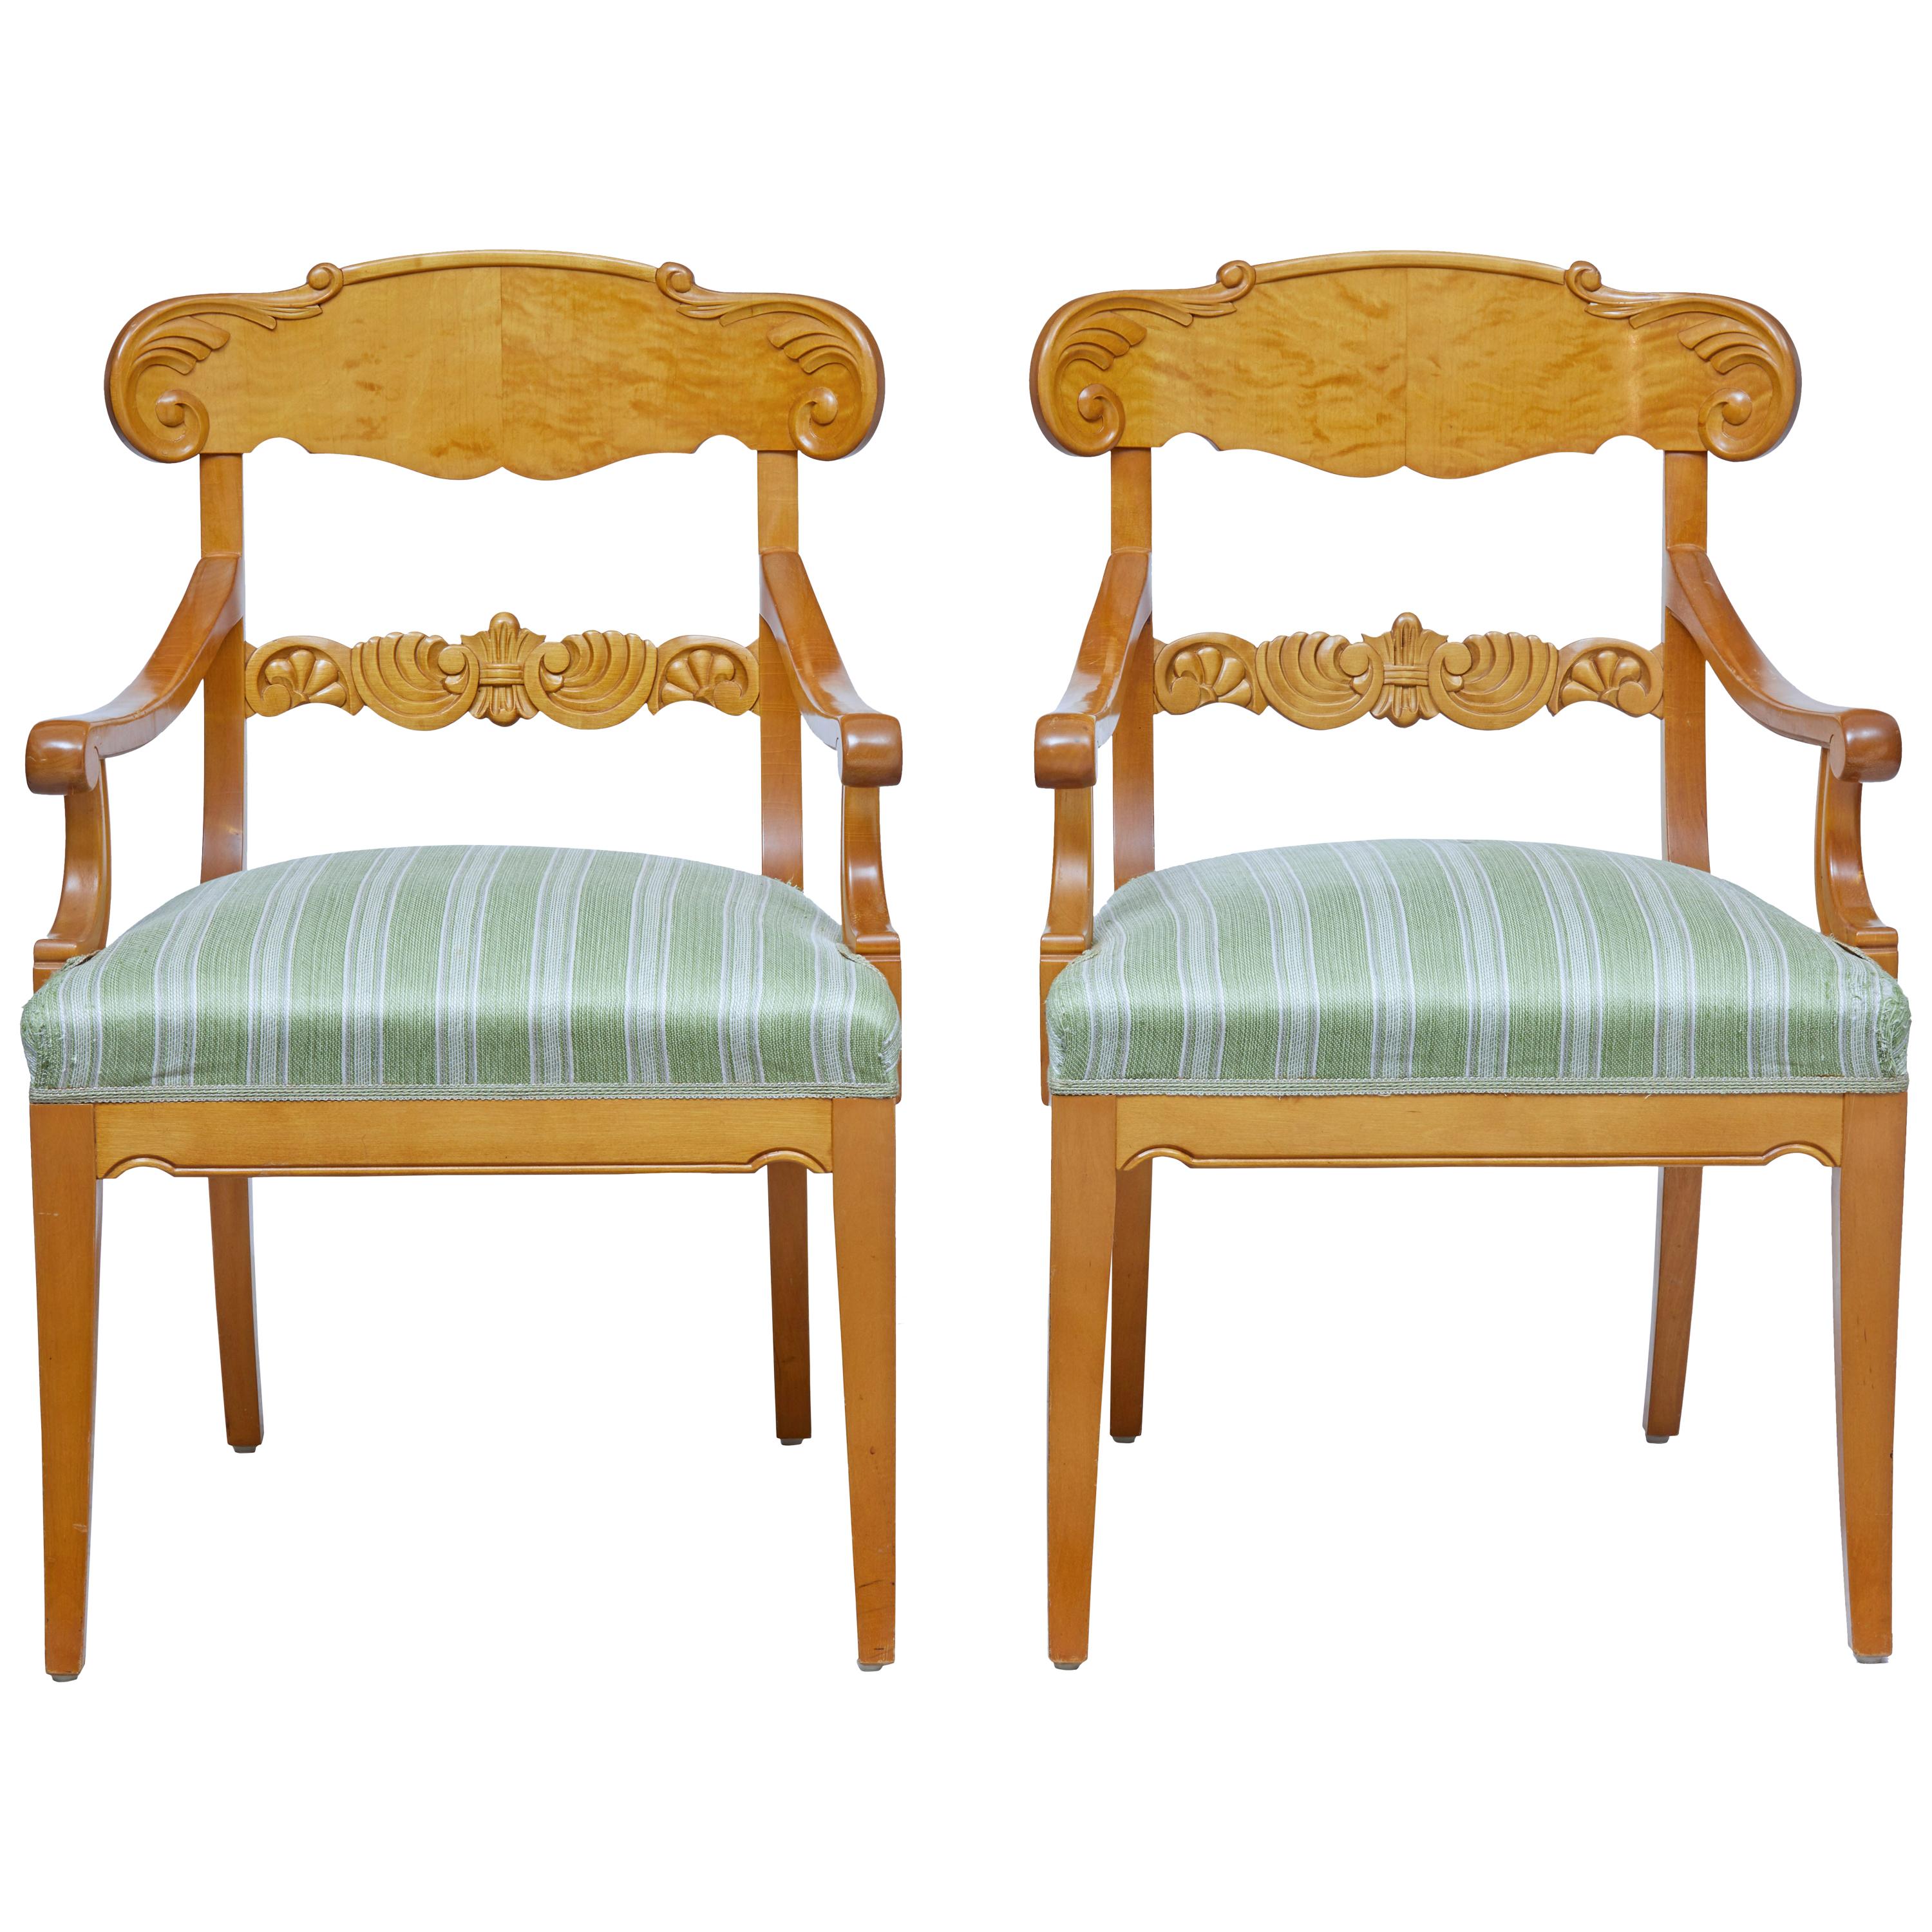 Pair of Early 20th Swedish Carved Birch Armchairs